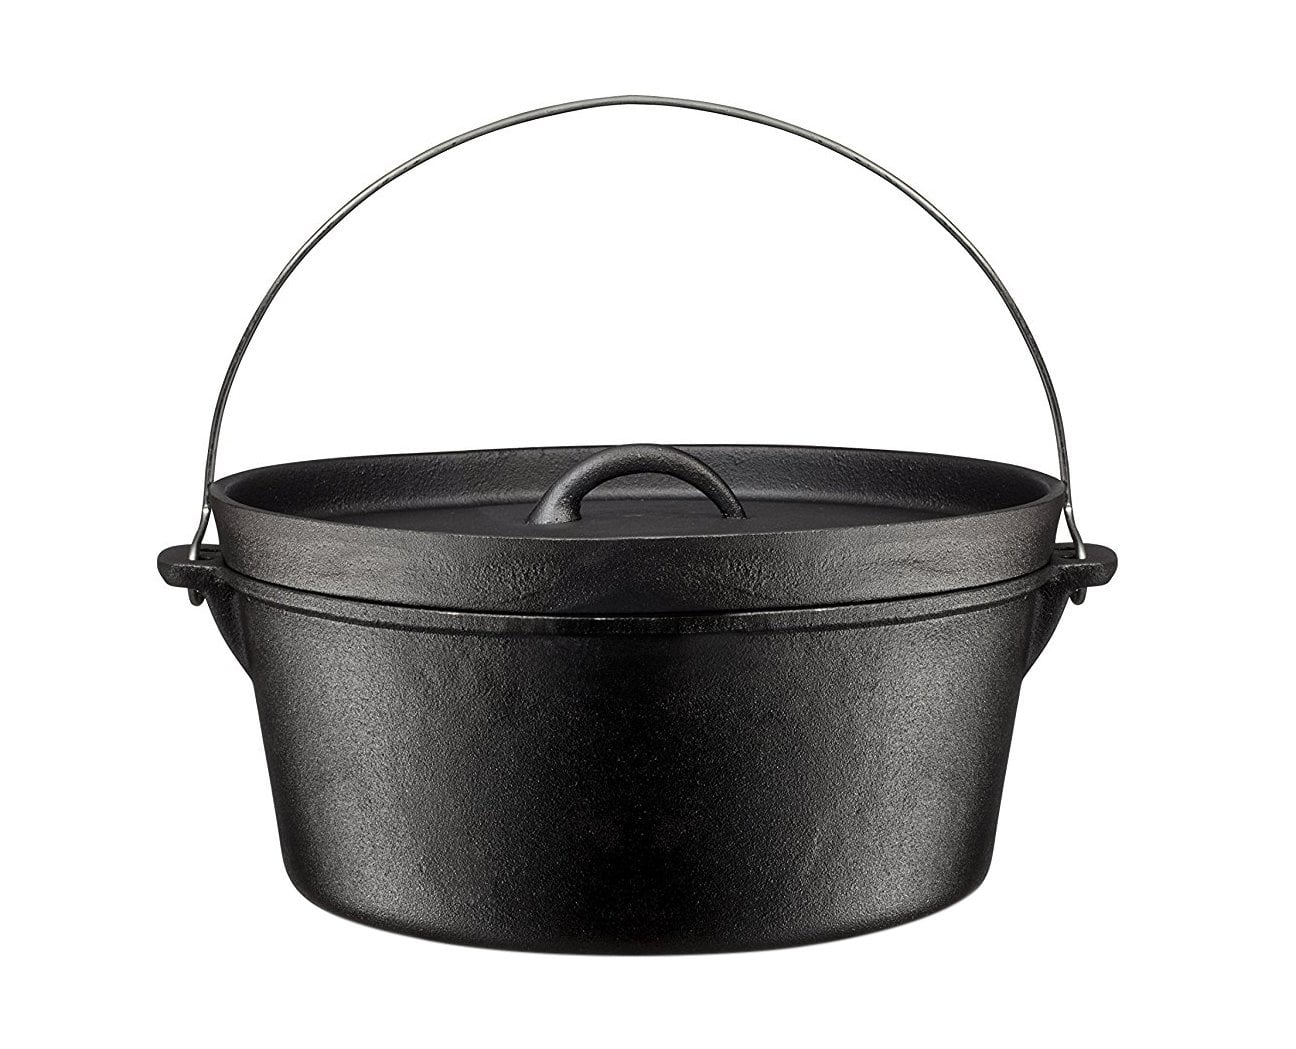 Morjor Dutch Oven Bag for 12 & 10 inch Dutch Oven, Carry Bag with Extra Inner Crossed Straps & 2 Pockets